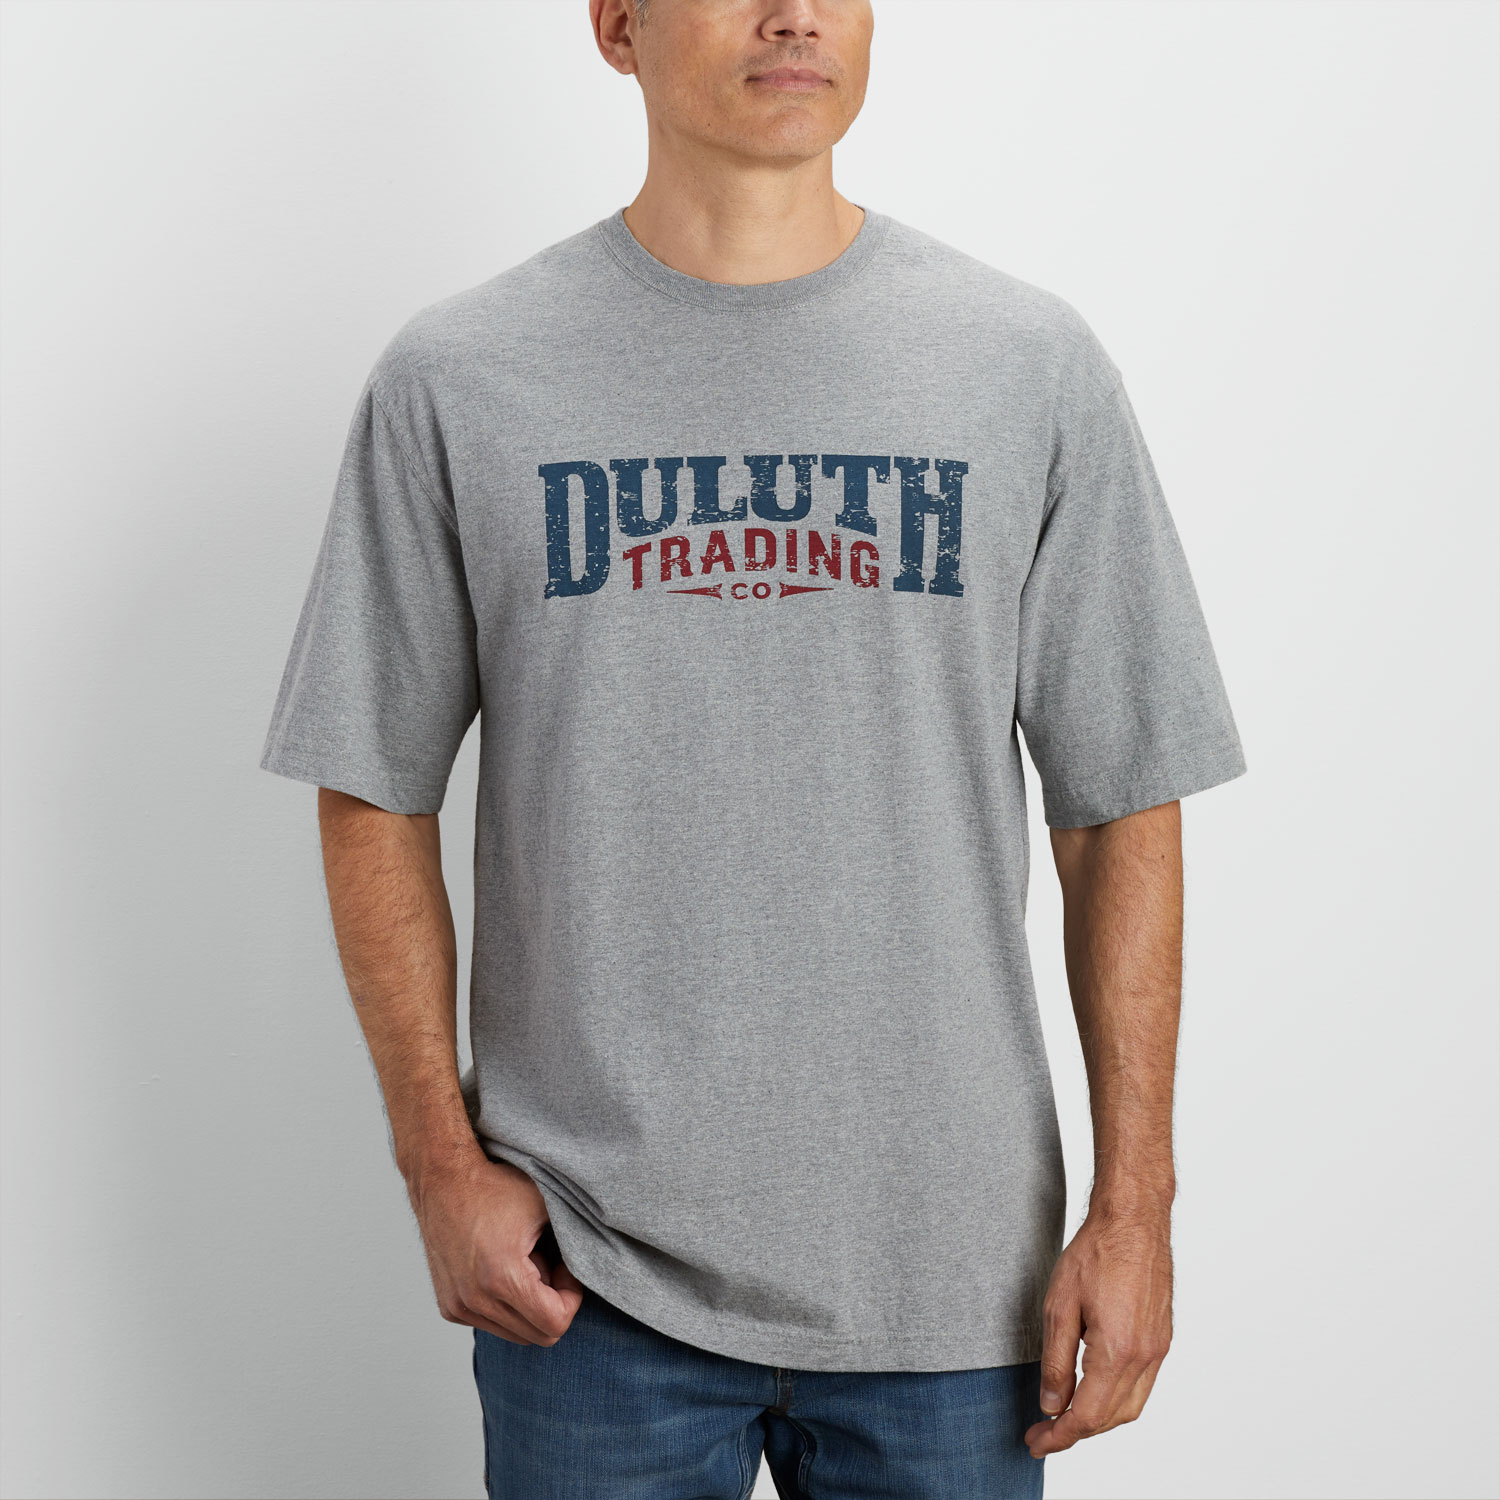 Duluth Trading Company Ad - Longtail T Shirt - The Cure for Plumber's Butt  (2014 - 2015 Television Commercial)